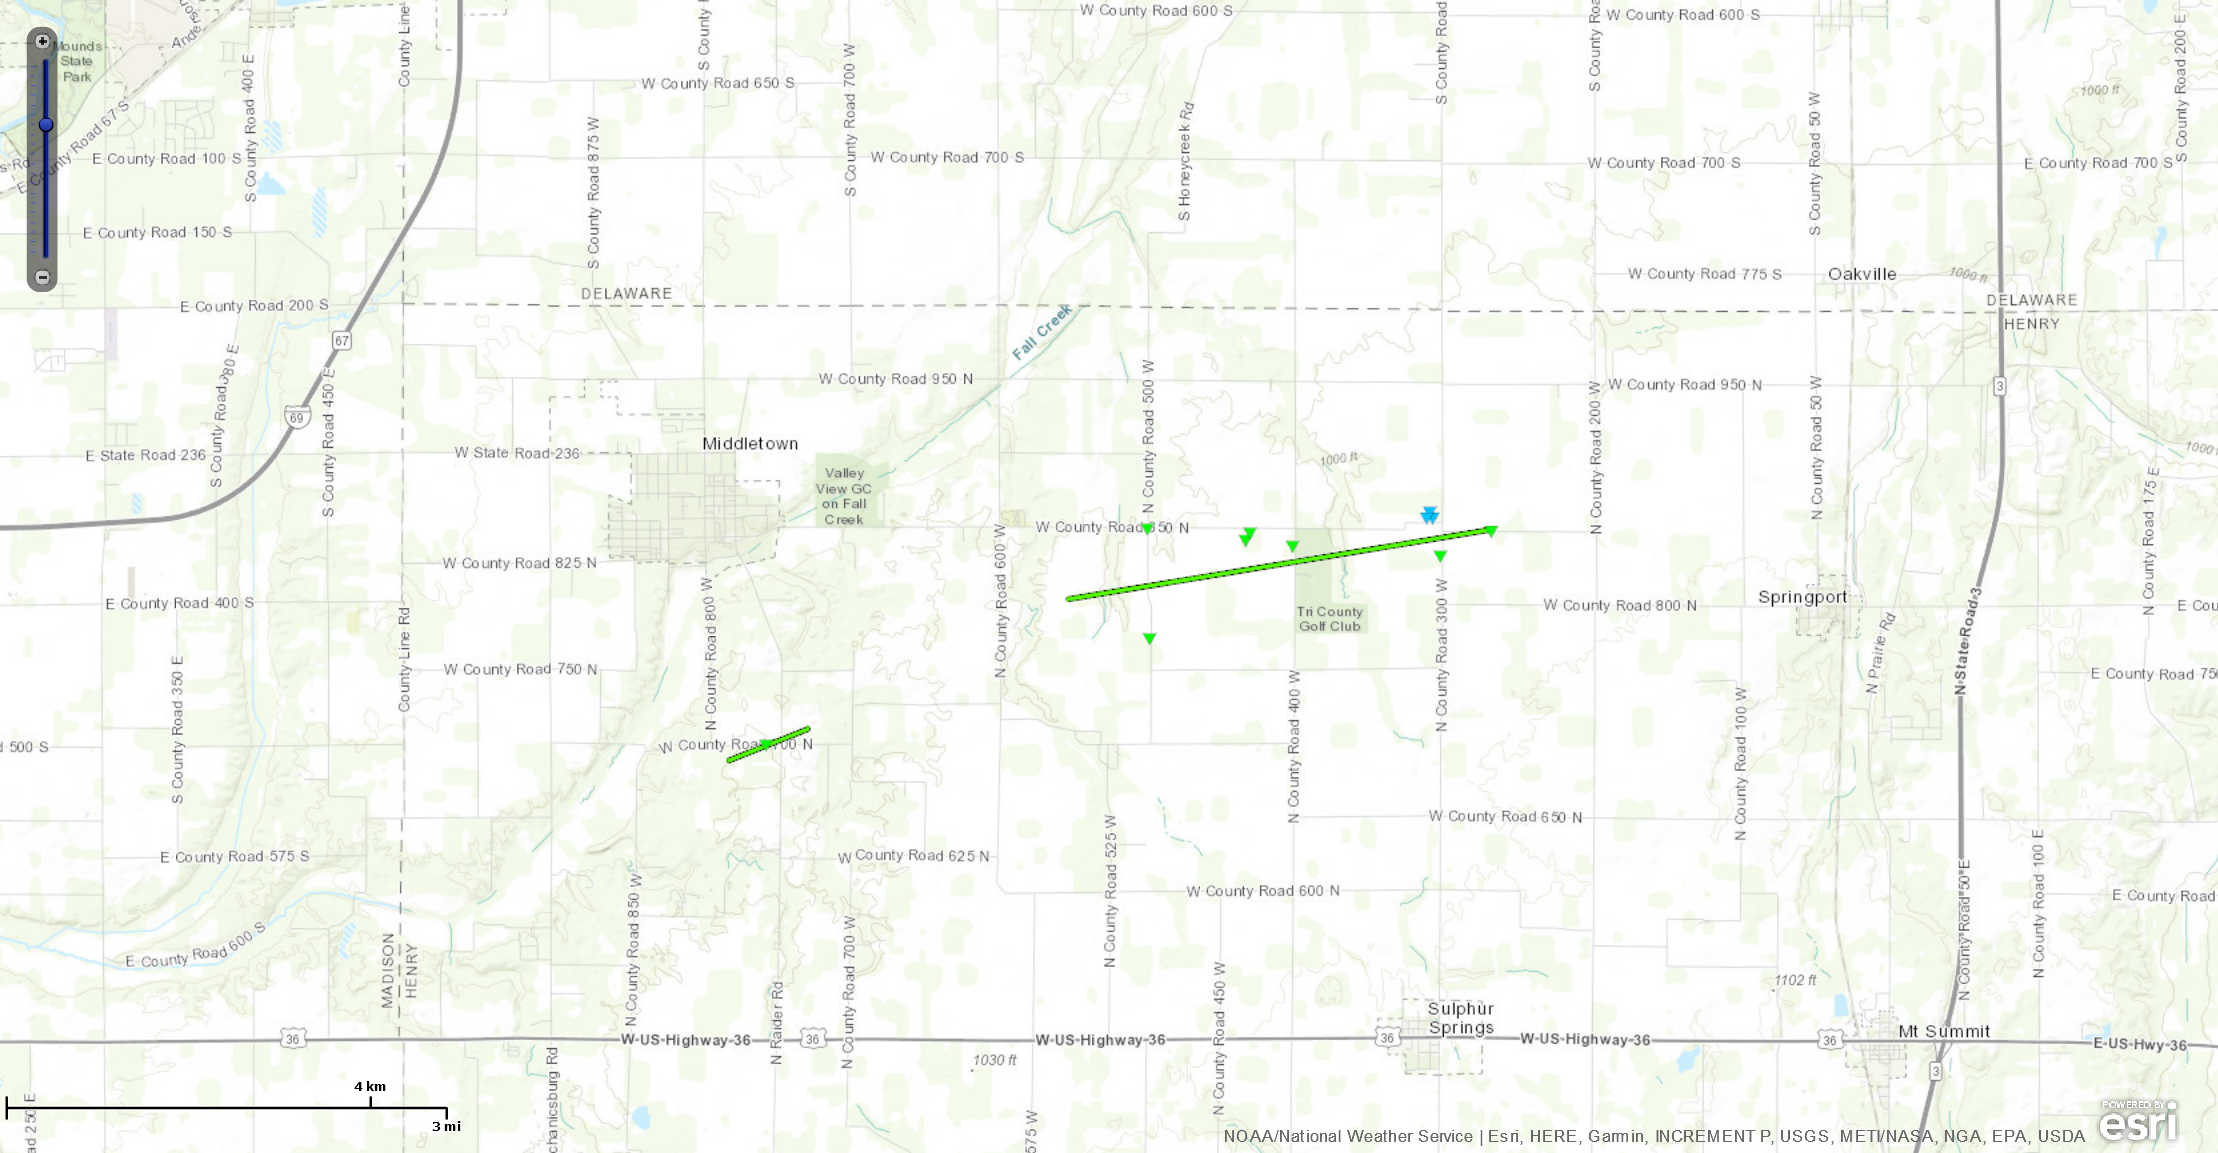 Track Map of Both Middletown Tornadoes